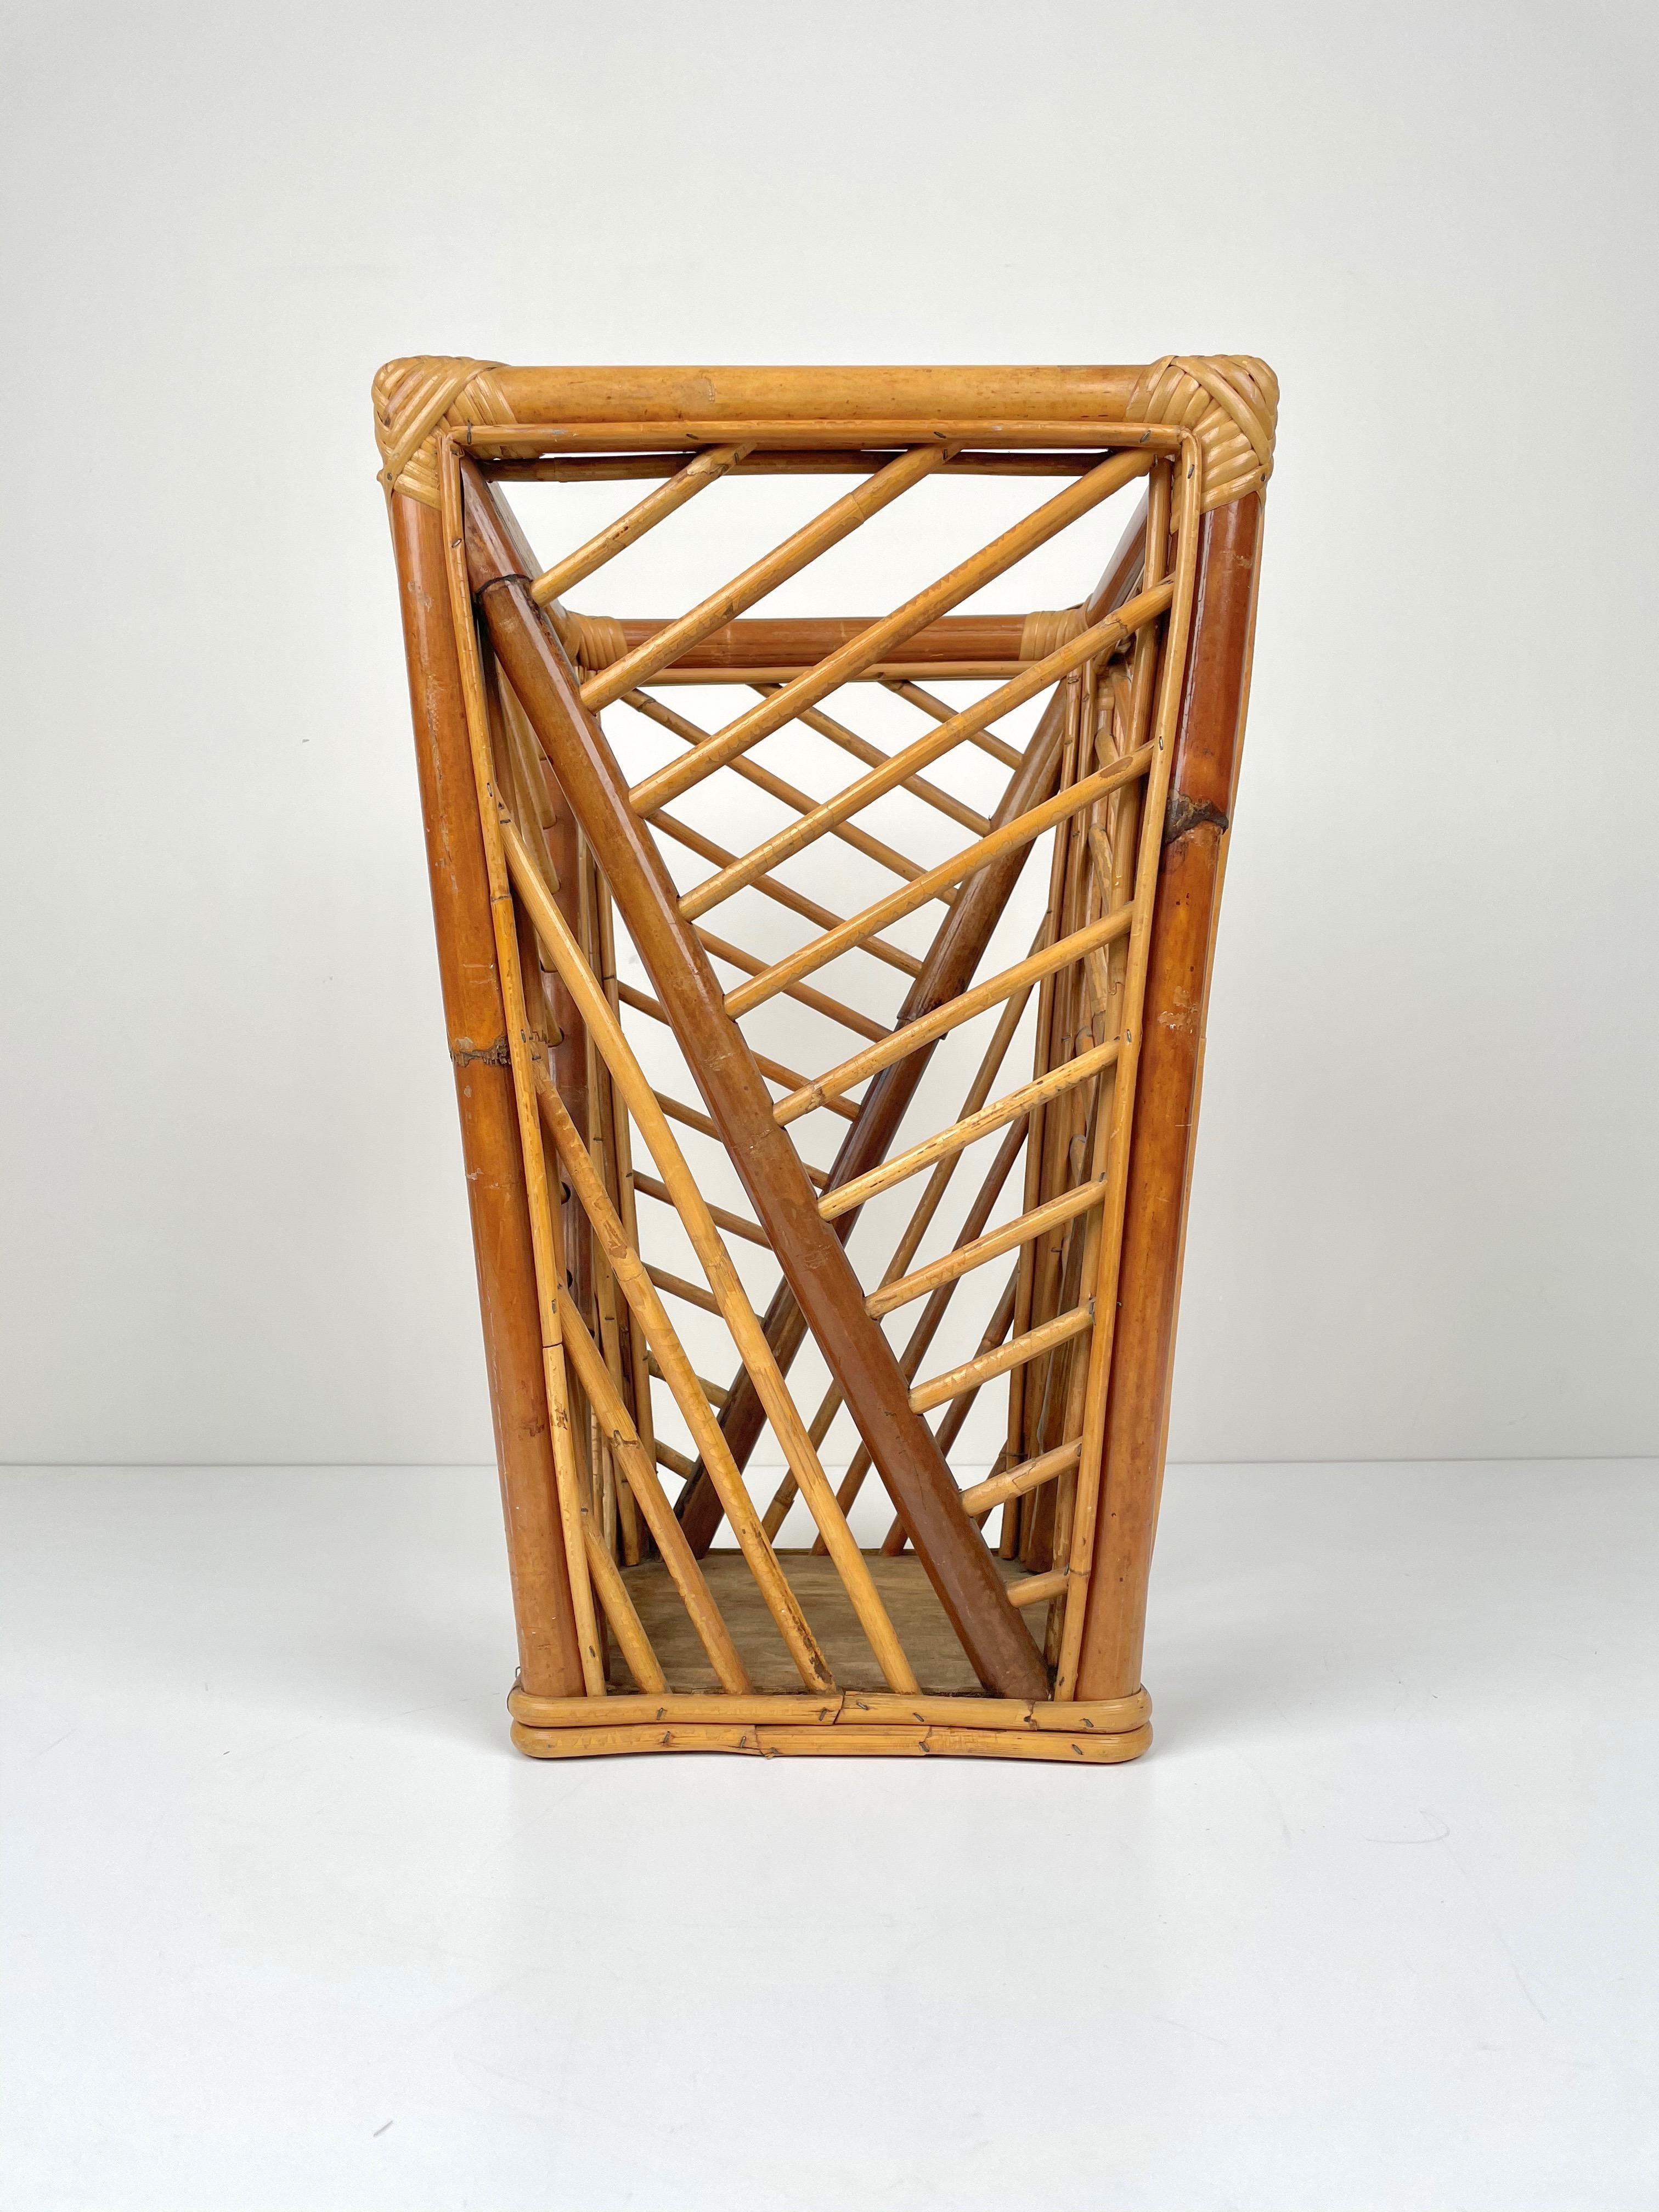 Umbrella stand in rattan and bamboo structure made in Italy in the 1960s.